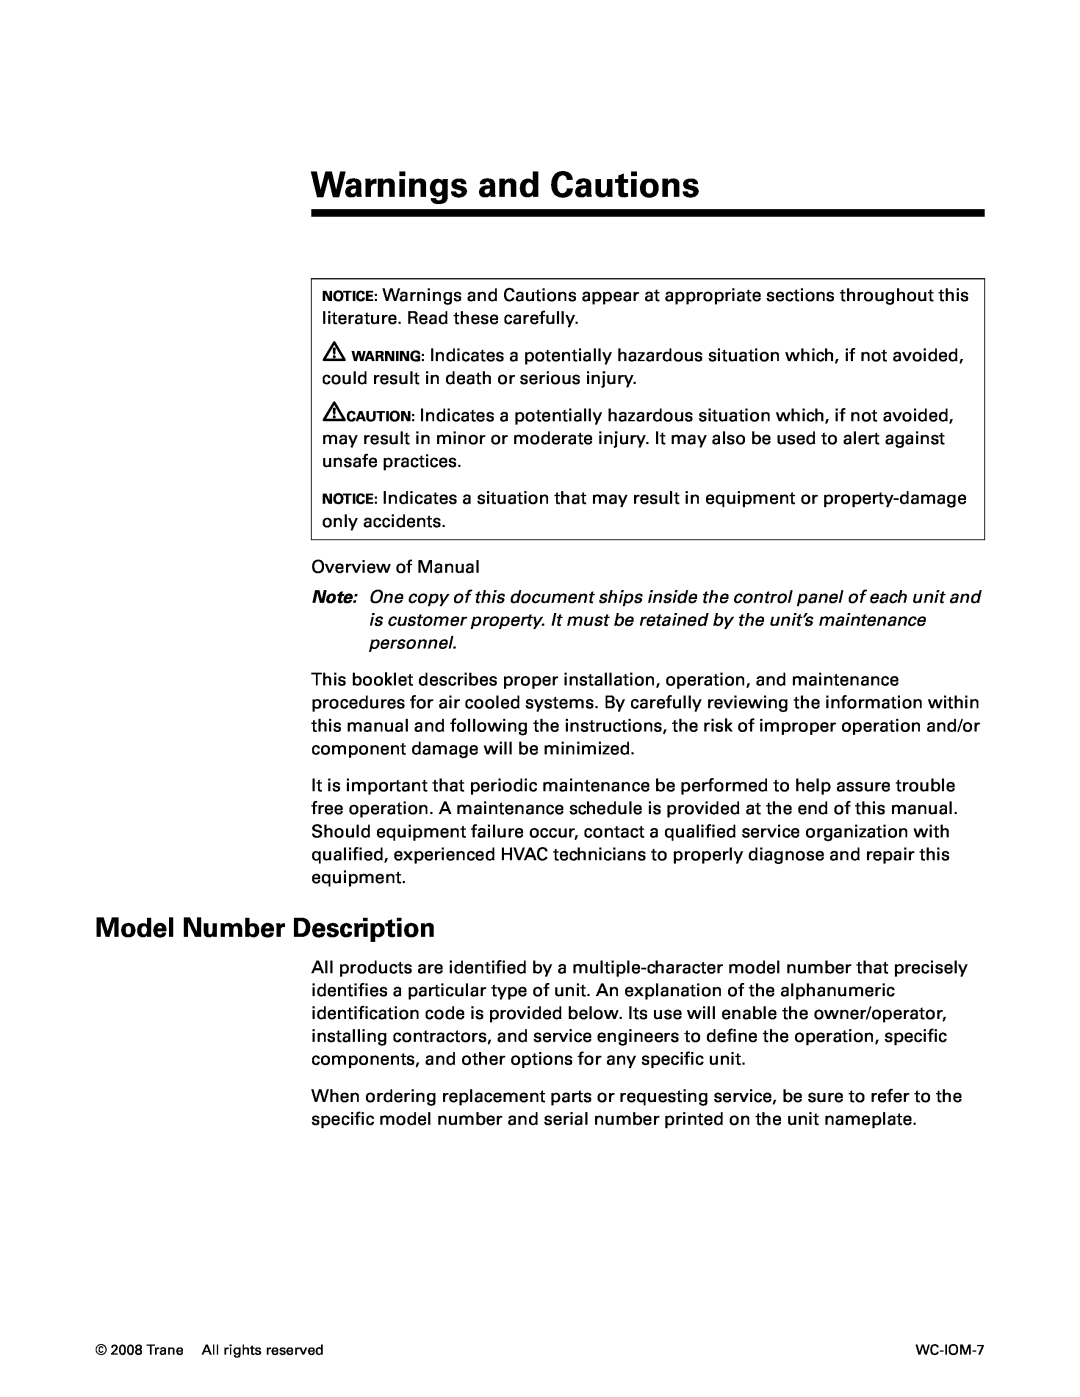 Trane WC-IOM-7 manual Warnings and Cautions, Model Number Description 